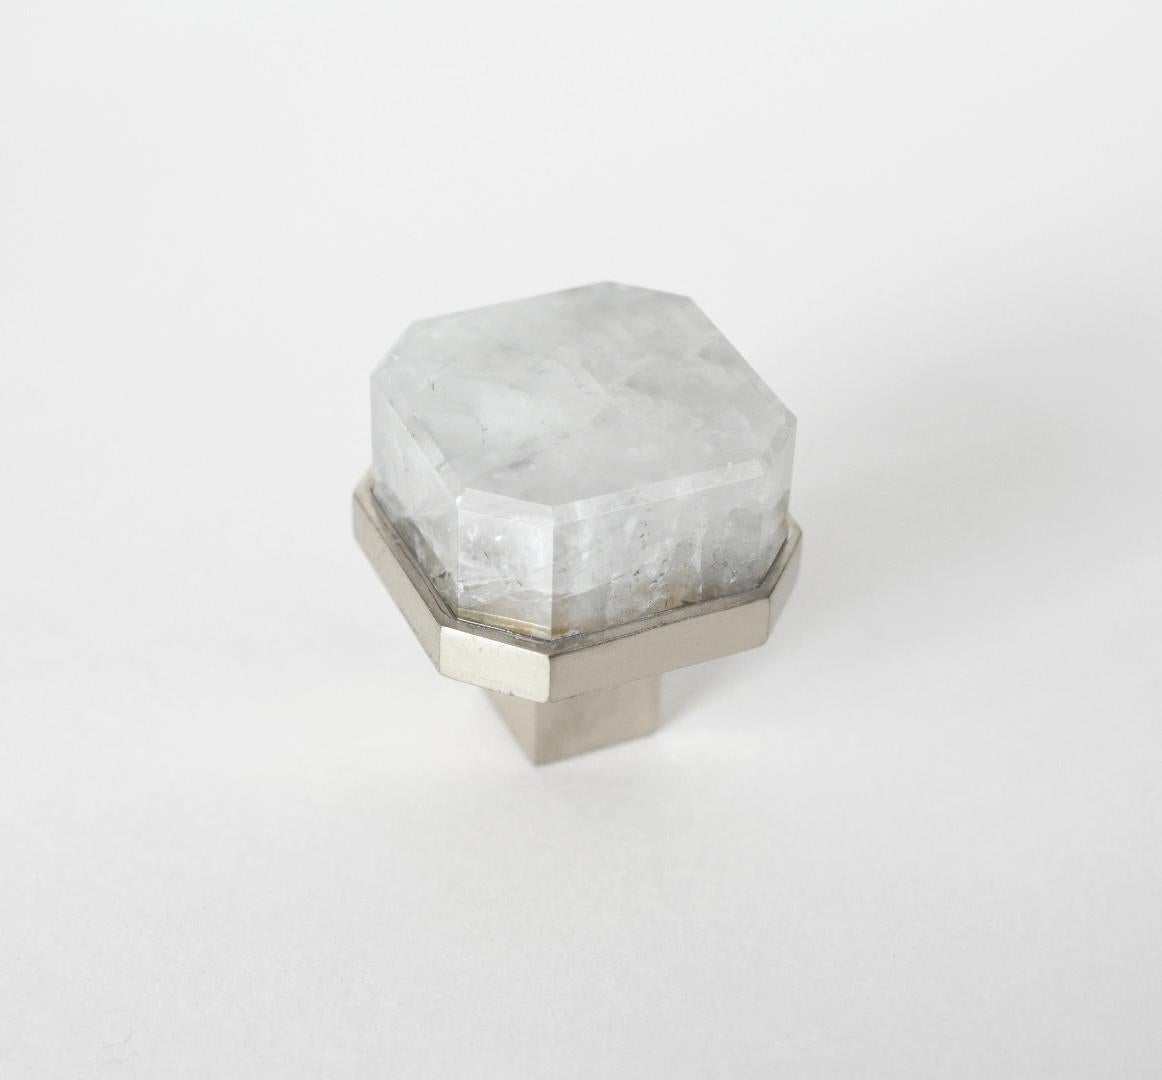 Rock Crystal Quartz Knob by Phoenix In Excellent Condition For Sale In New York, NY